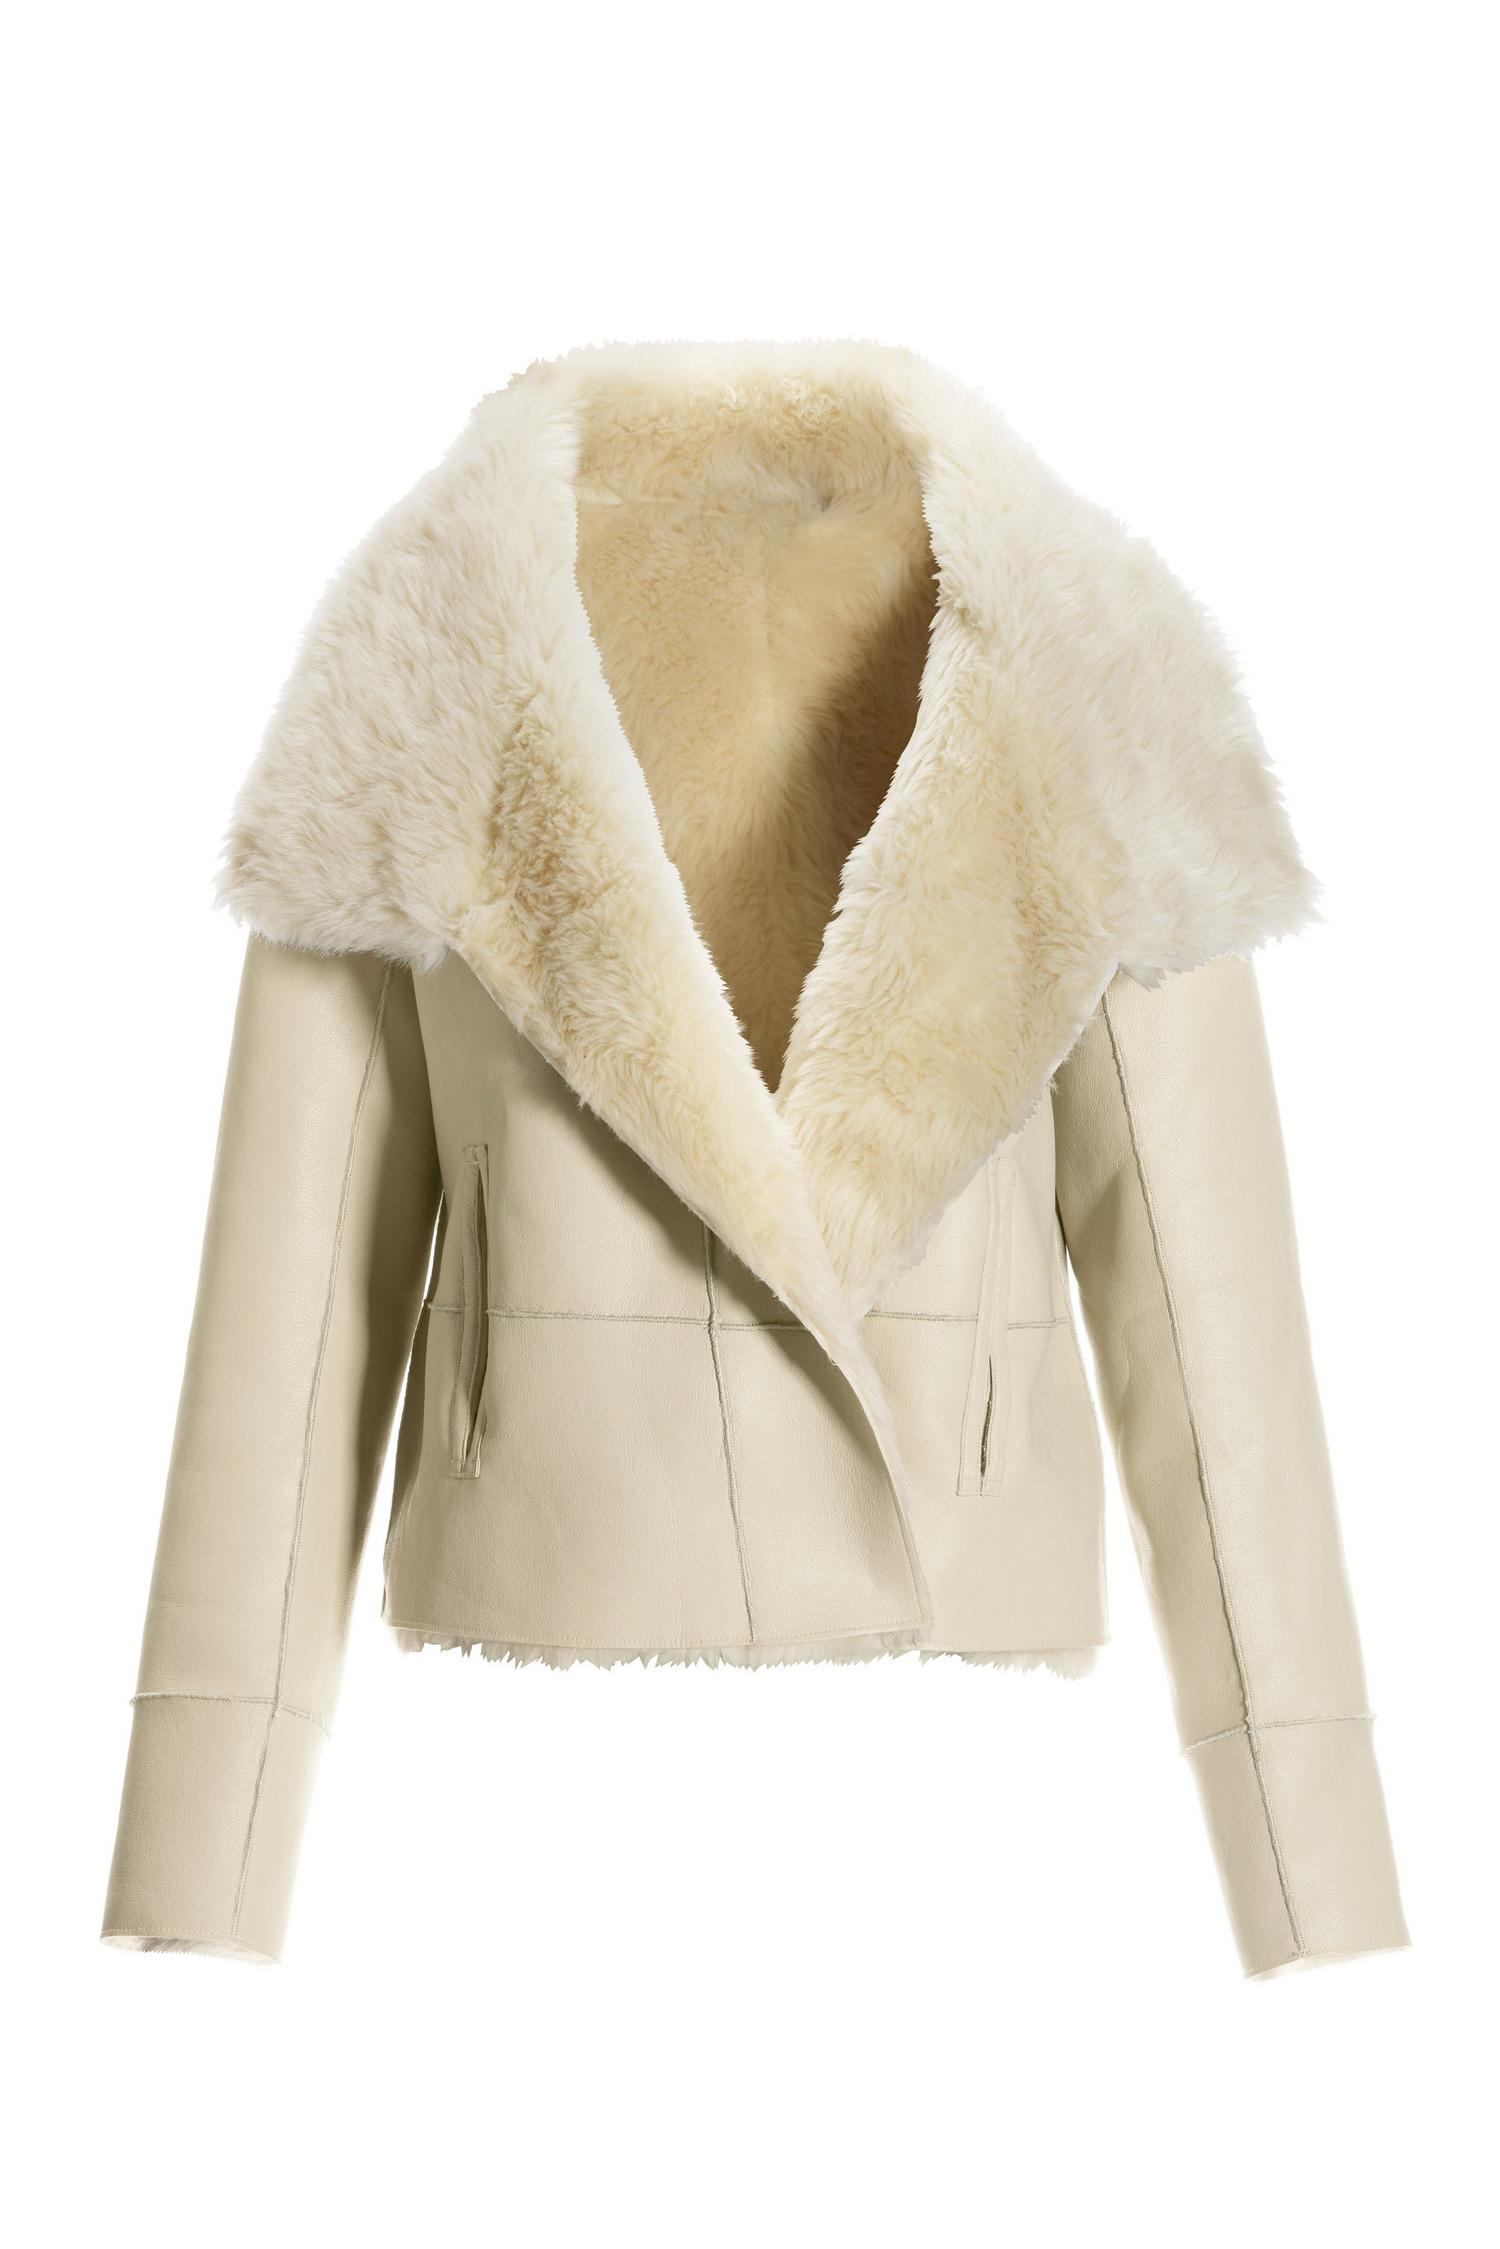 Ivory Faux Fur Cropped Jacket | Womens | Medium (Available in XS, S, L) | 100% Polyester | Lulus